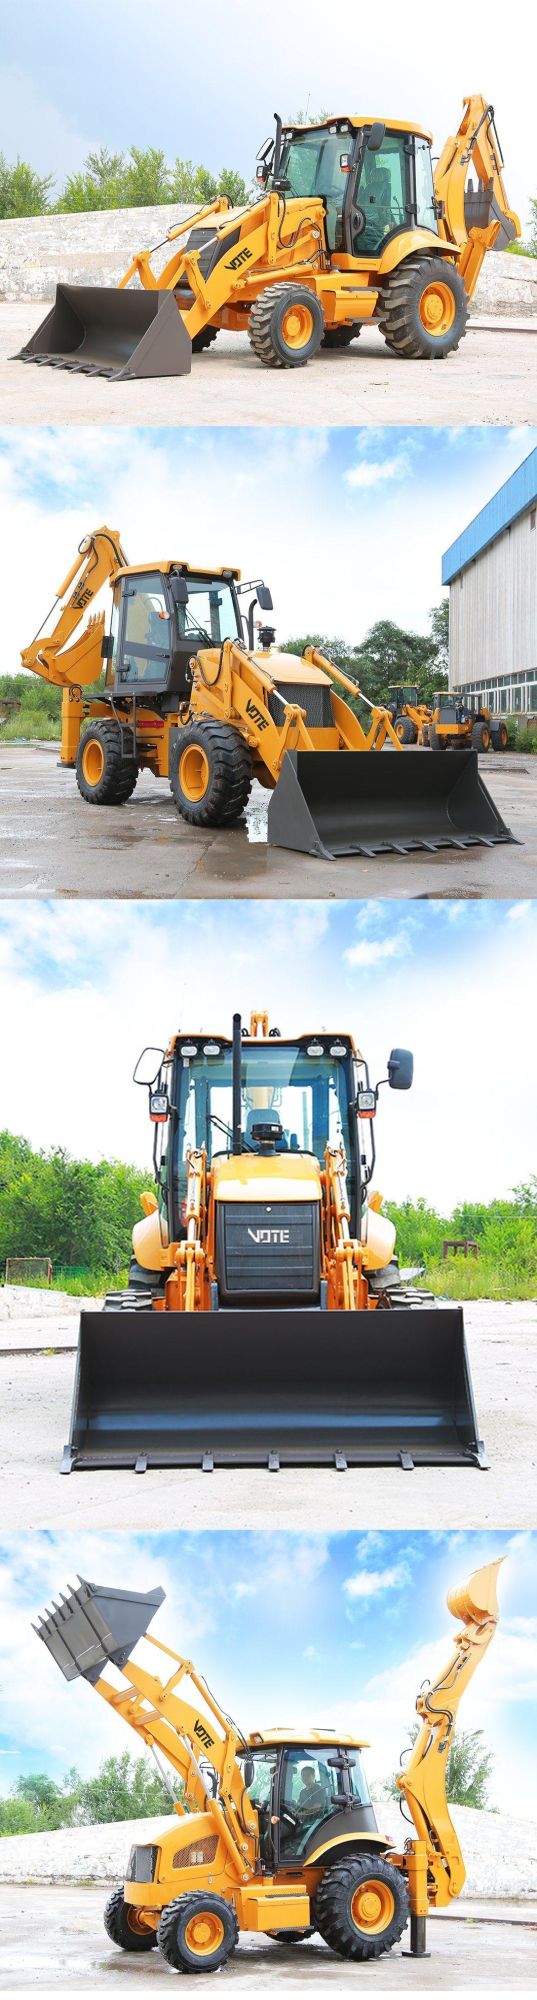 Hot Product Mini Tractor Backhoe Loader The Cheapest Mini Small Backhoe Loader 4X4 Backhoe for Sale with Price